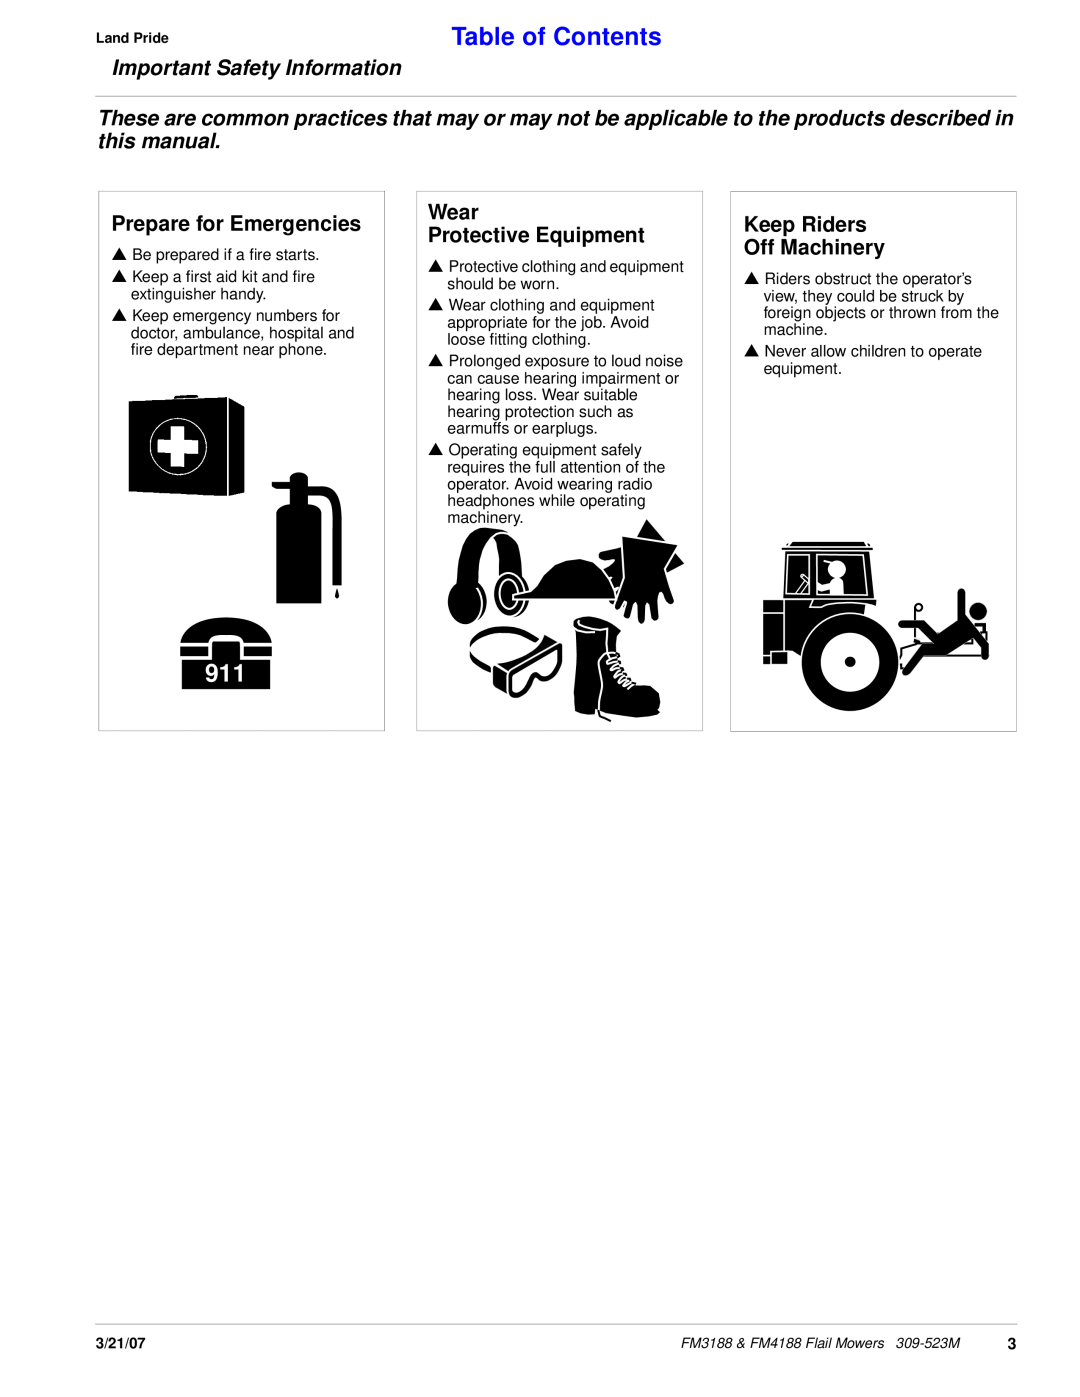 Land Pride FM3188 Table of Contents, Important Safety Information, Prepare for Emergencies, Wear Protective Equipment 